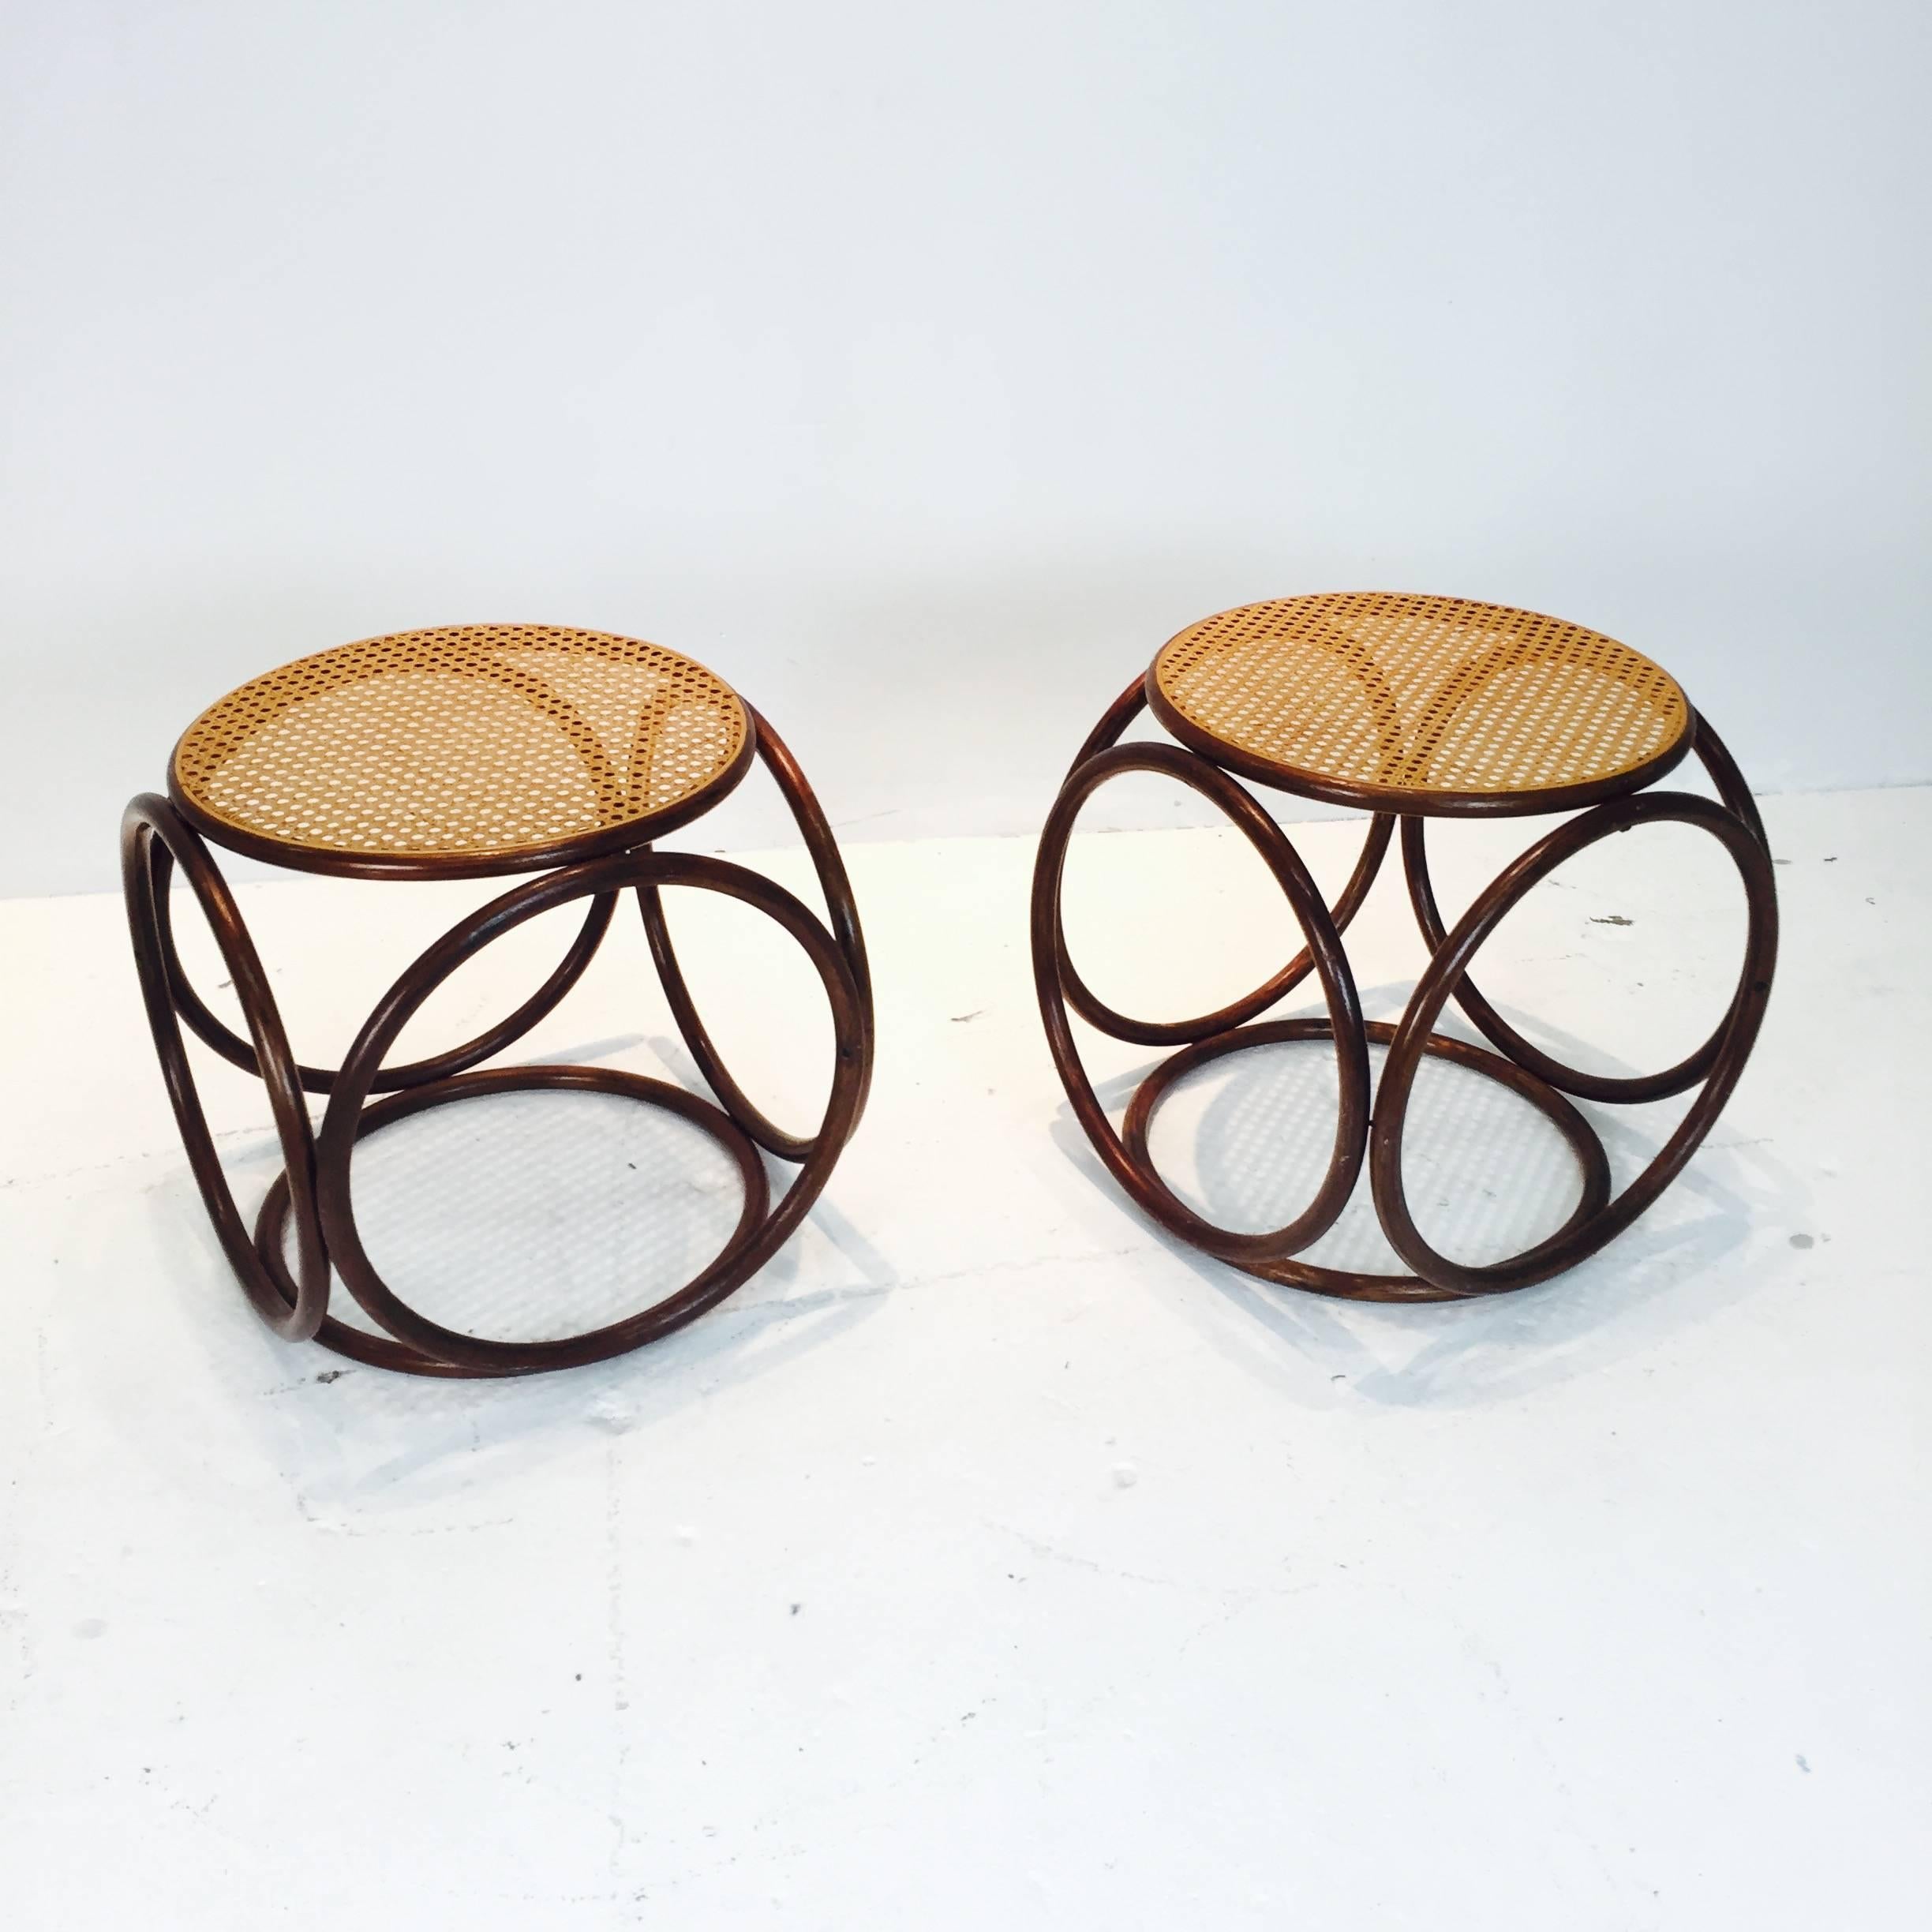 Pair of cane bentwood Thonet stools or ottomans.

Measures: 17